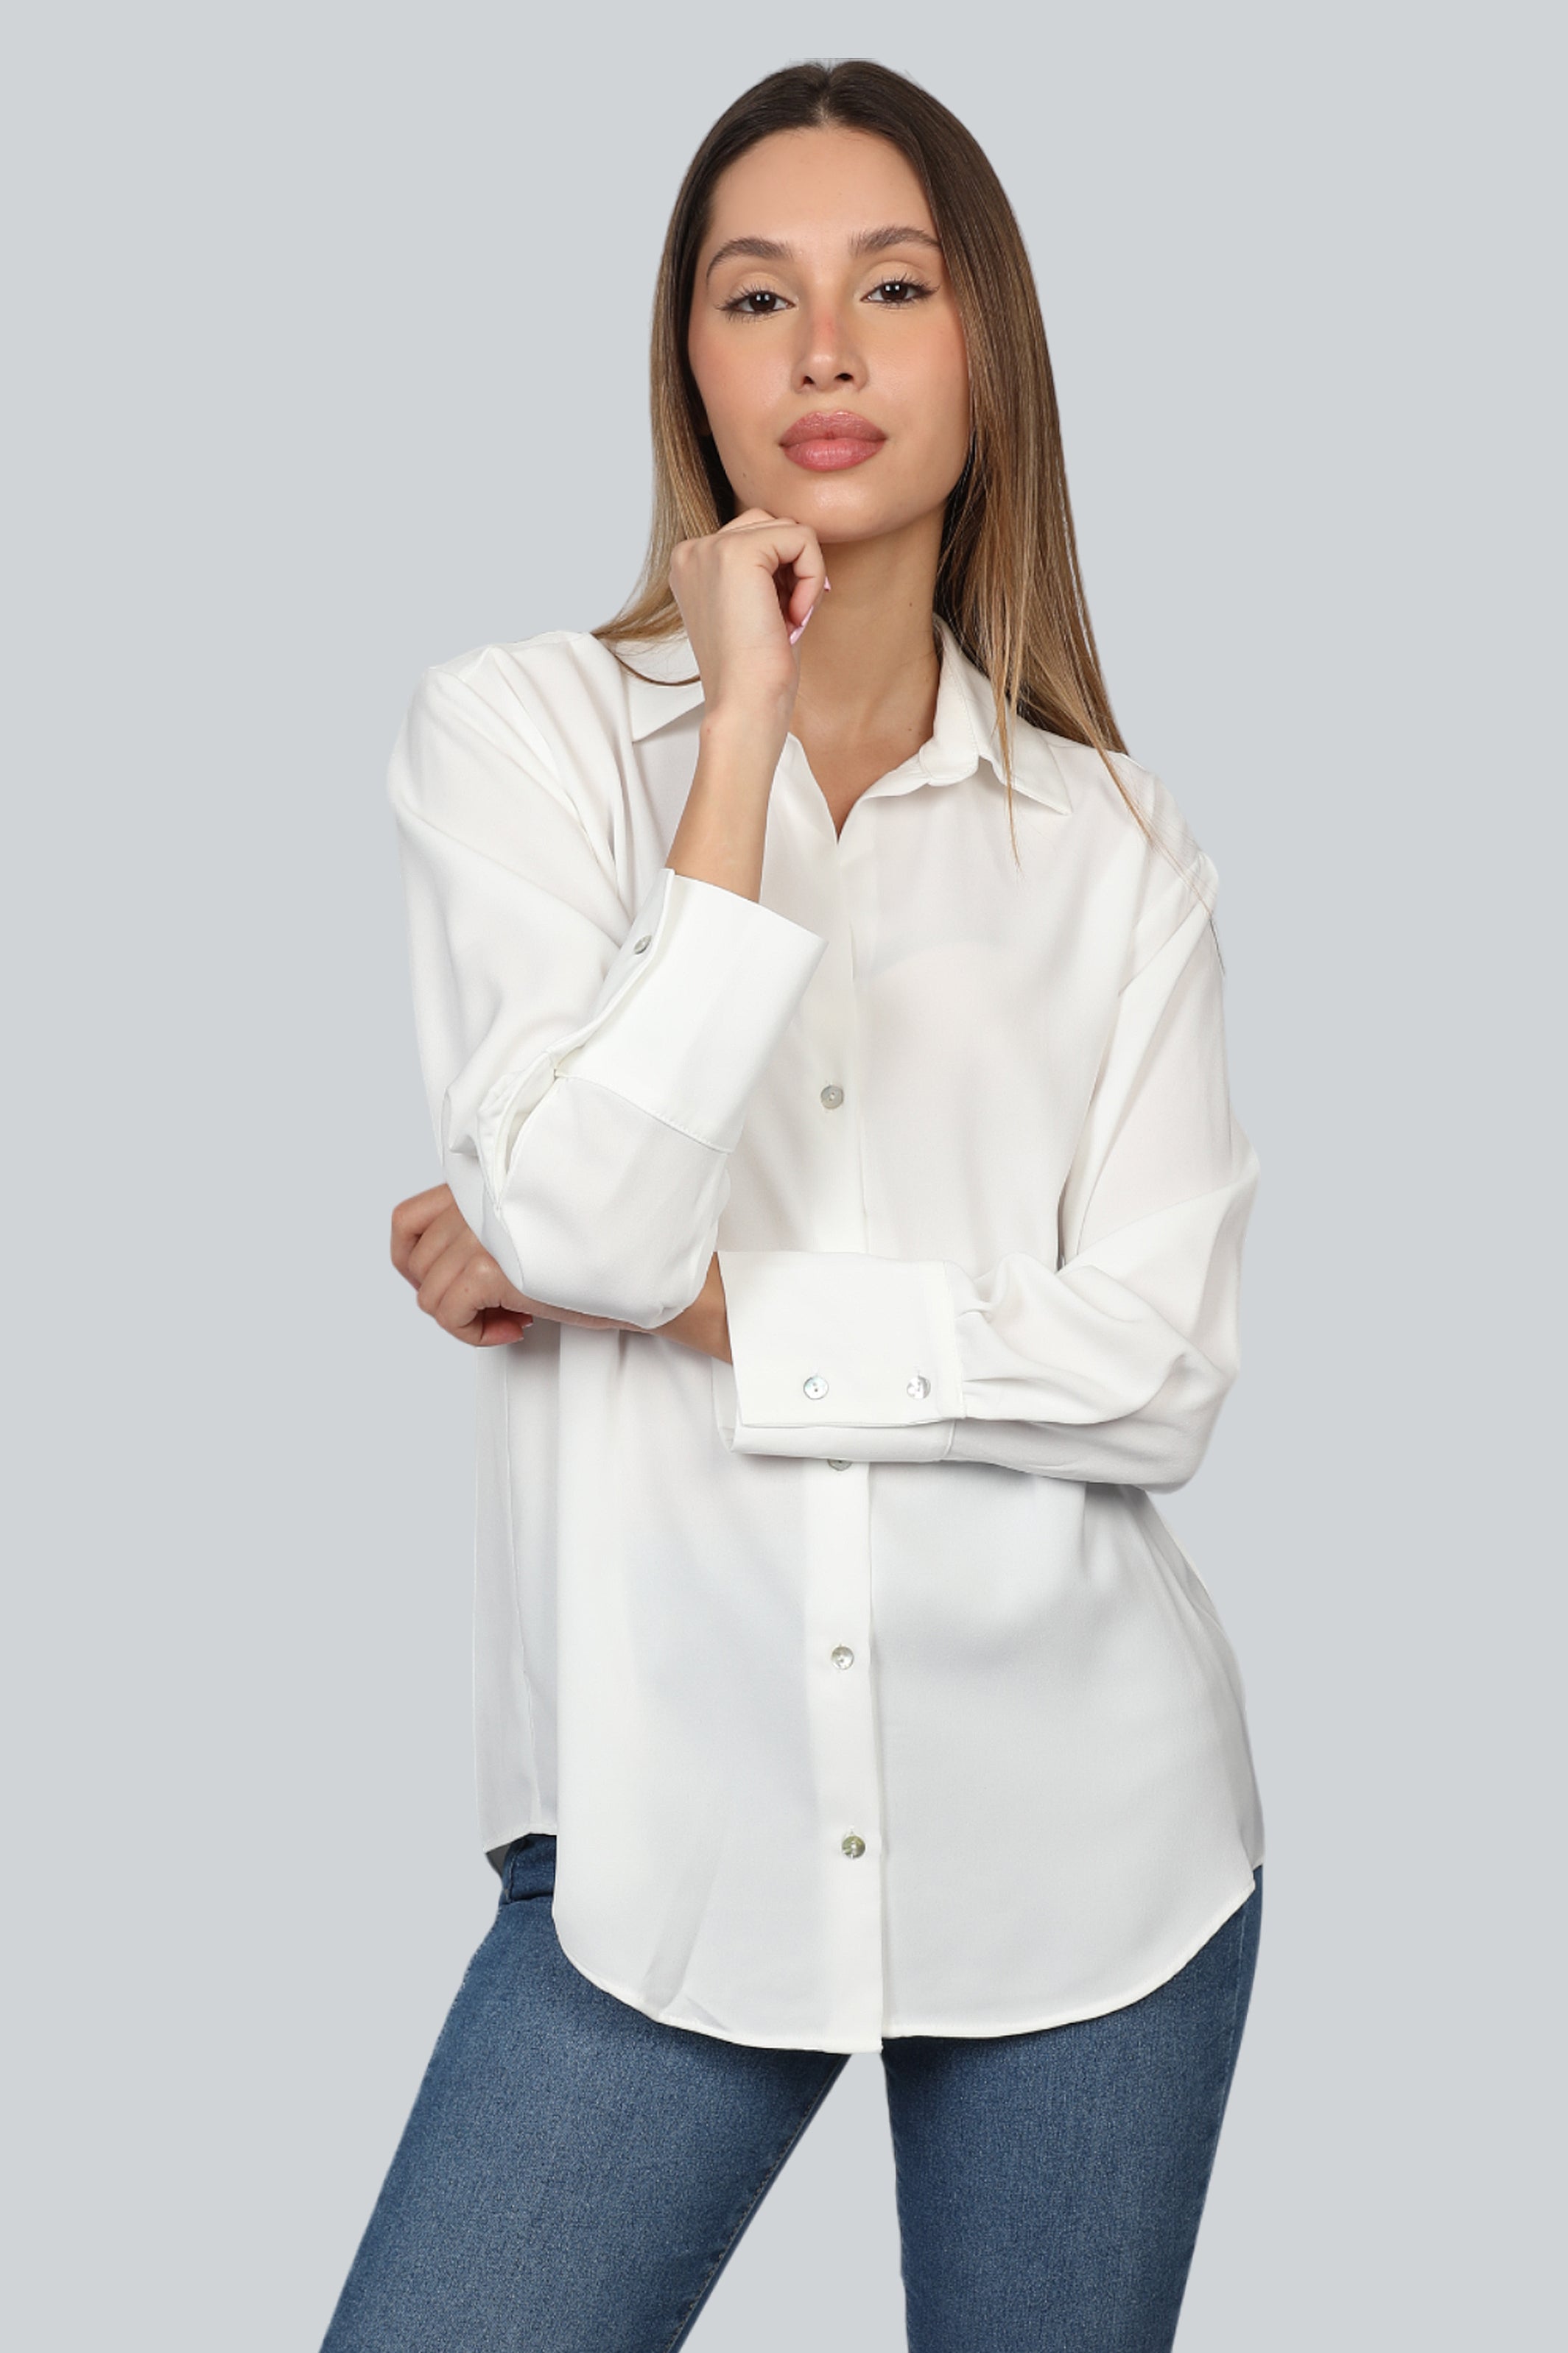 Classy White Women Shirt With Sleeves Button